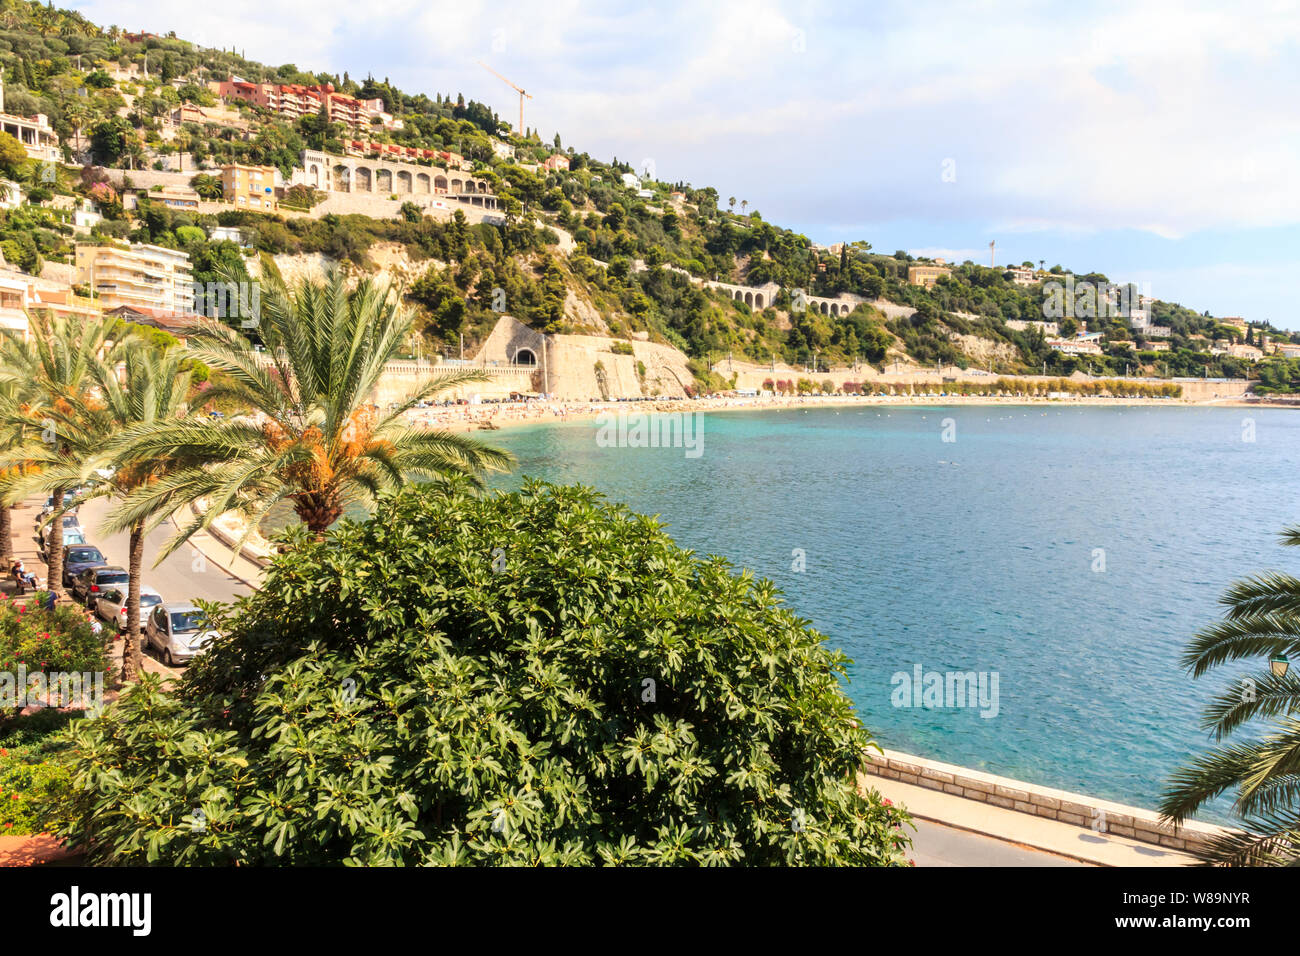 Bay and beach, Villefranche sur Mer, France Stock Photo